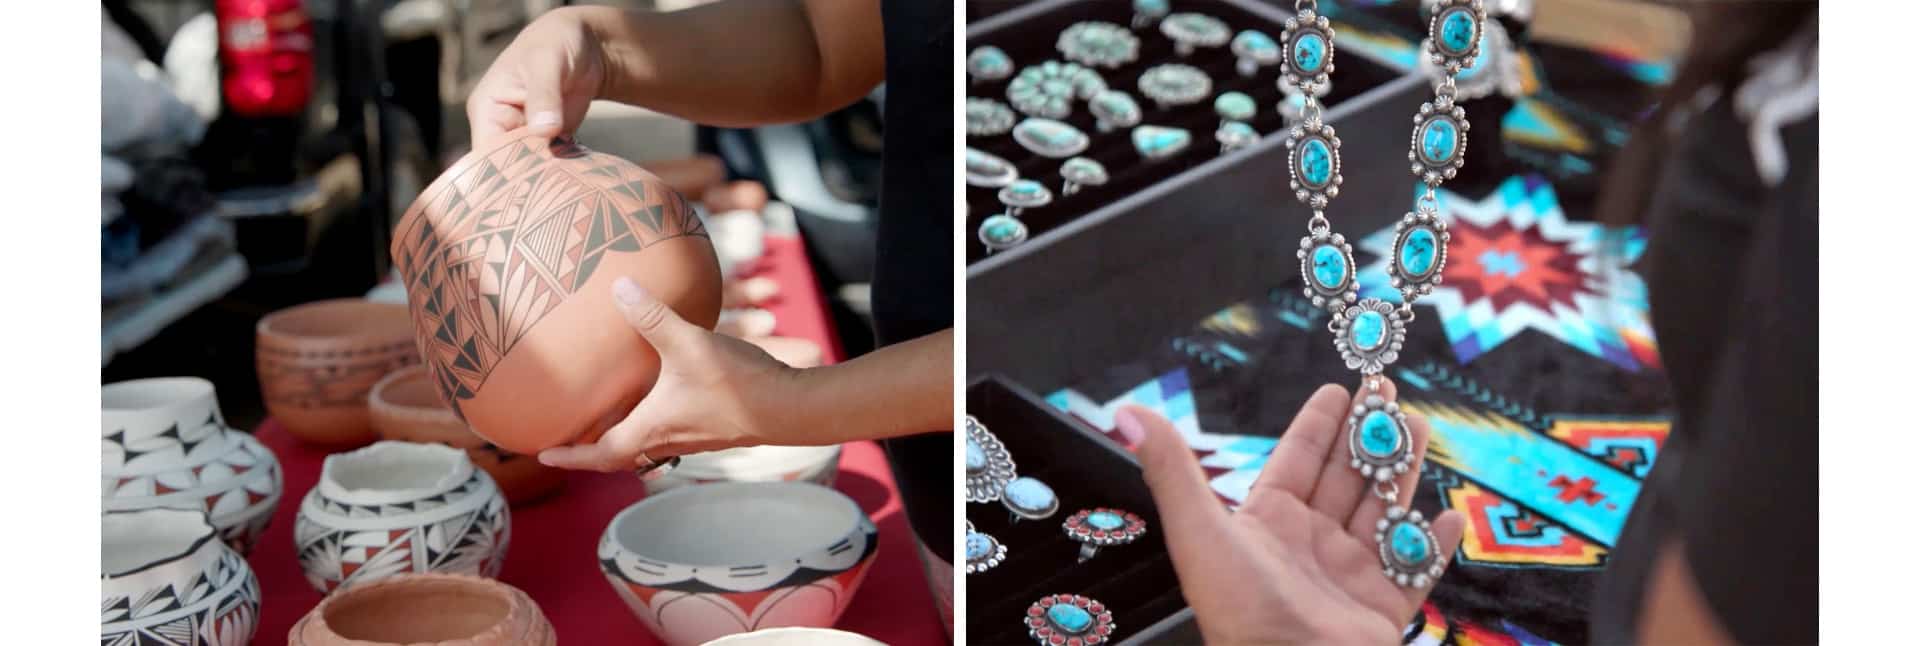 pottery and turquoise jewelry at flea market